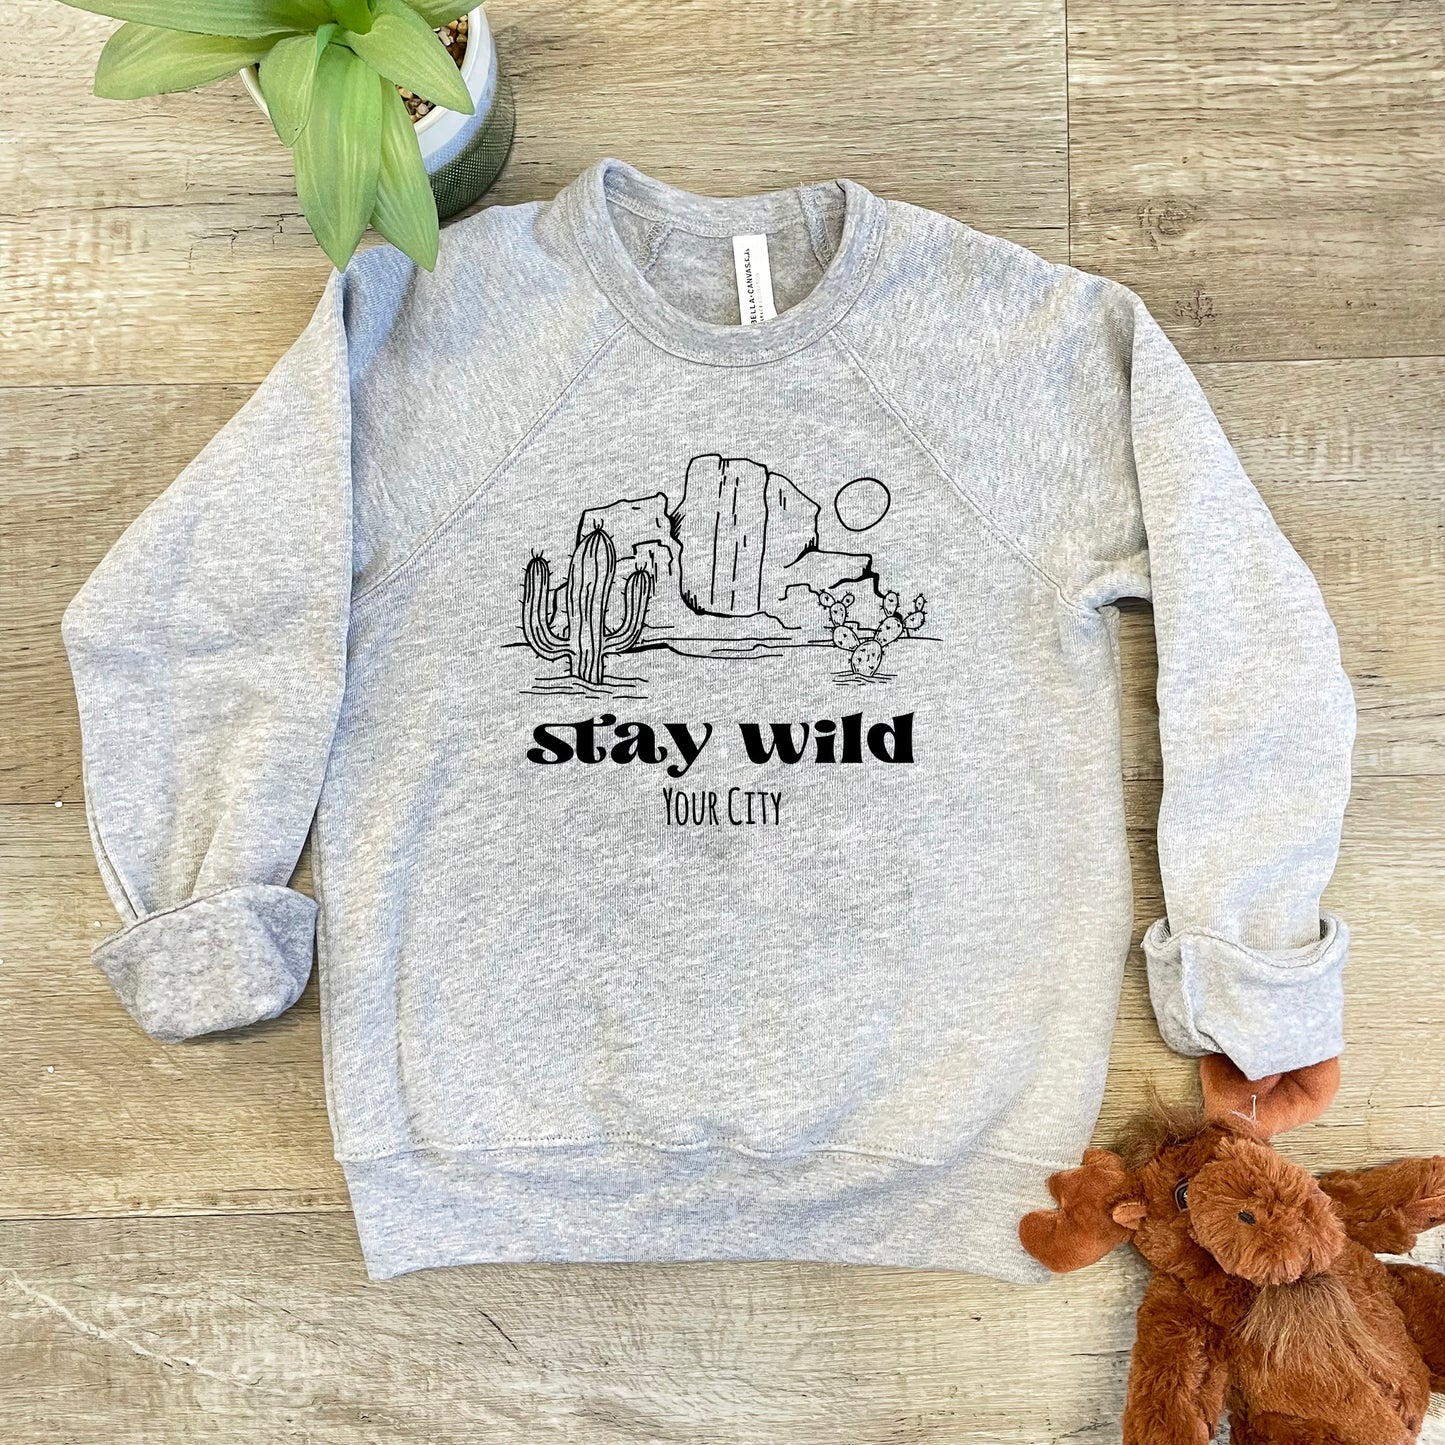 a gray sweatshirt with a cactus and a teddy bear